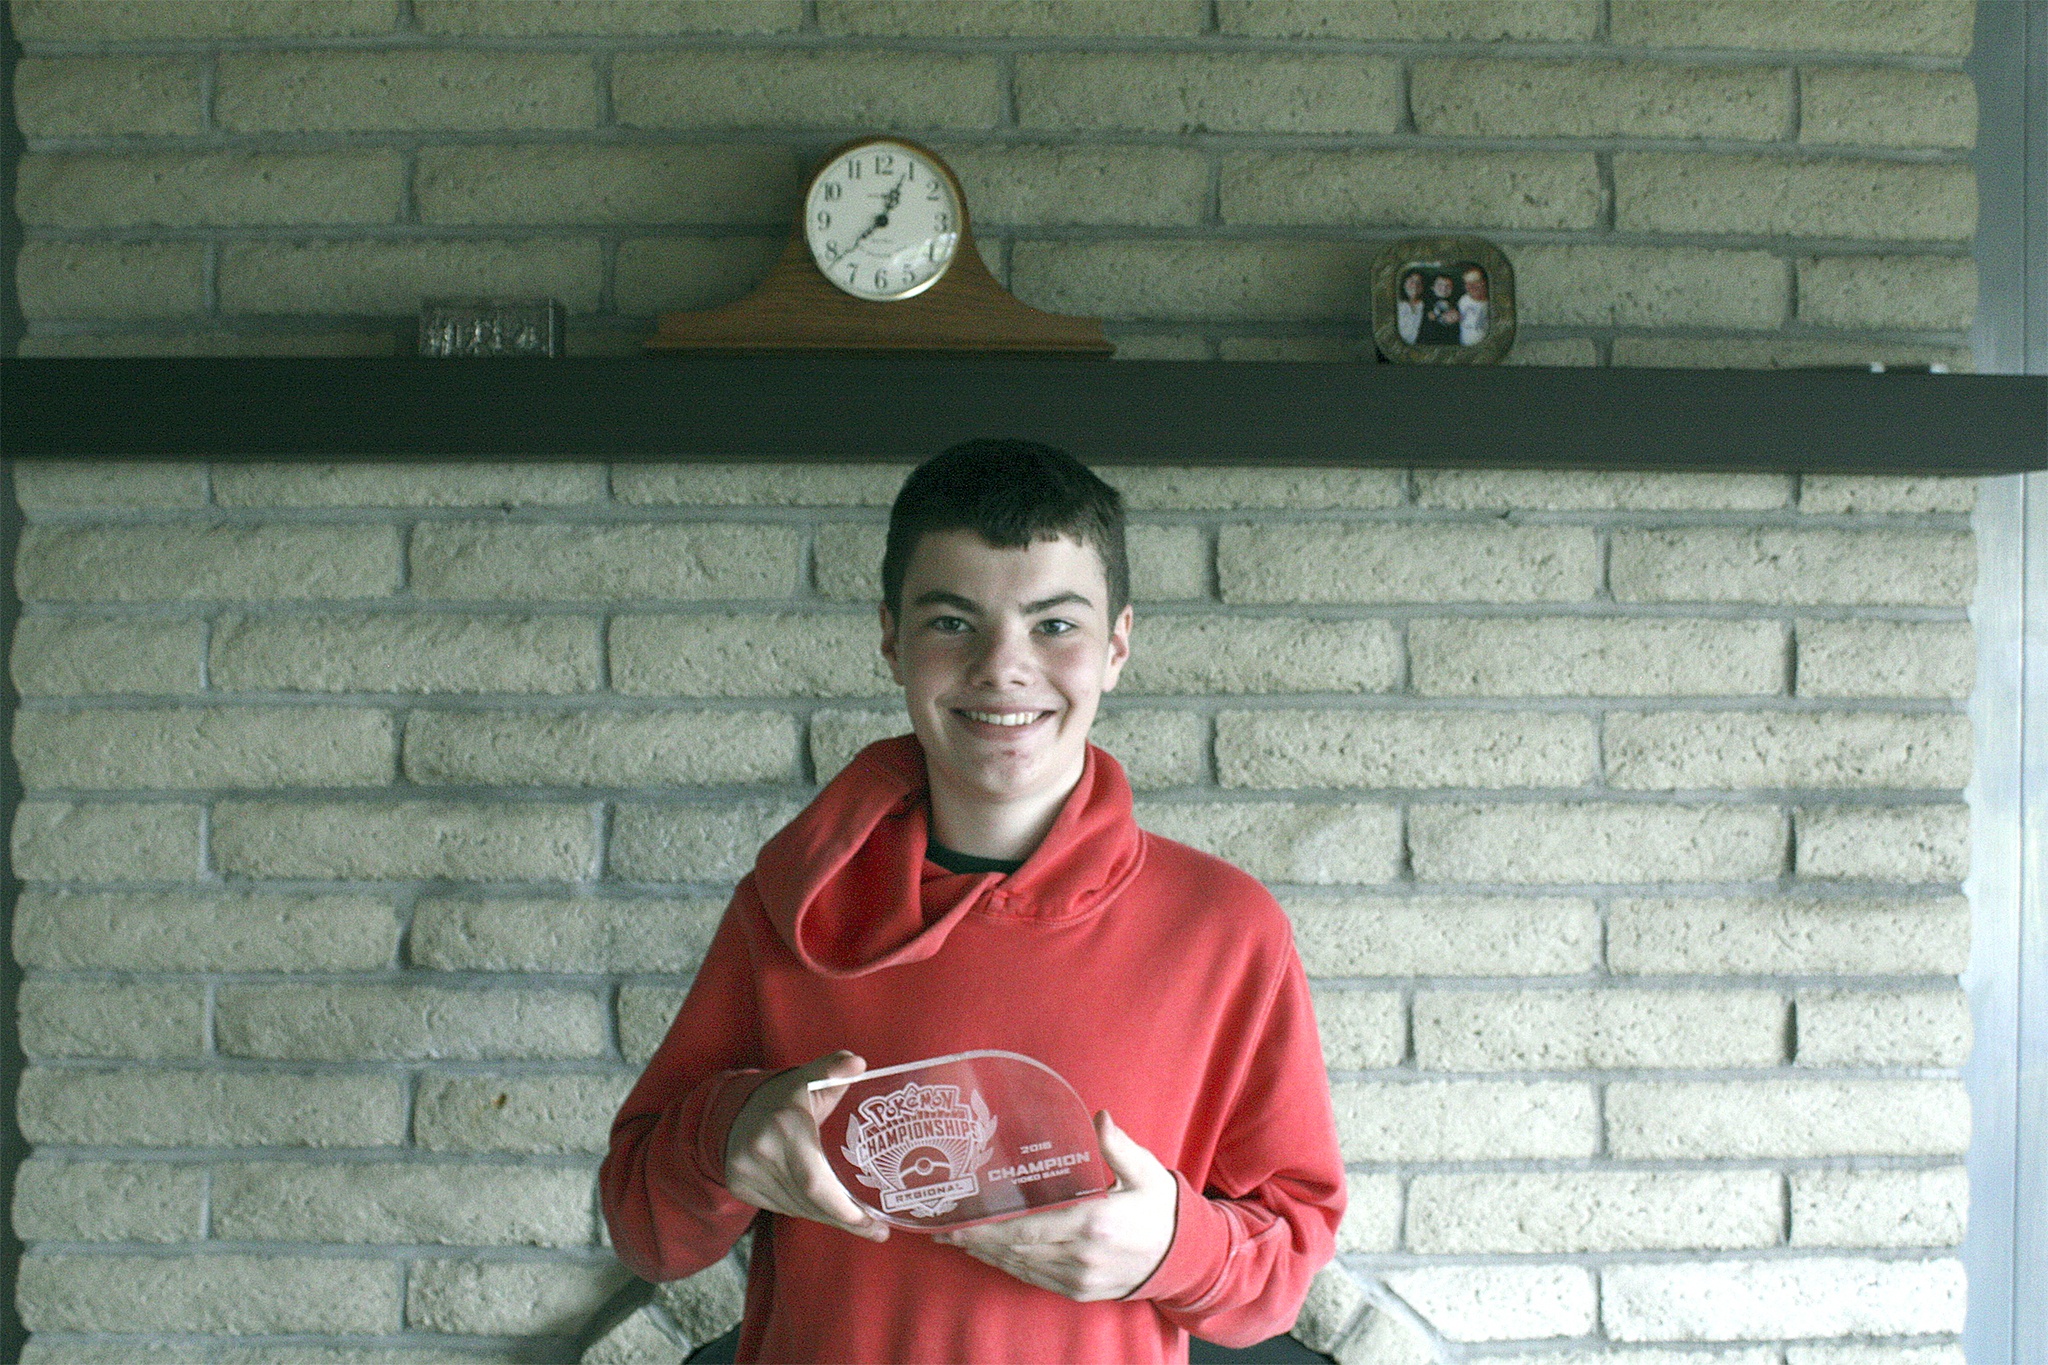 Aaron Nolan shows off his Regional Pokémon trophy that helped him on his way to the National Pokémon tournament in August. Ryan Murray/staff photo